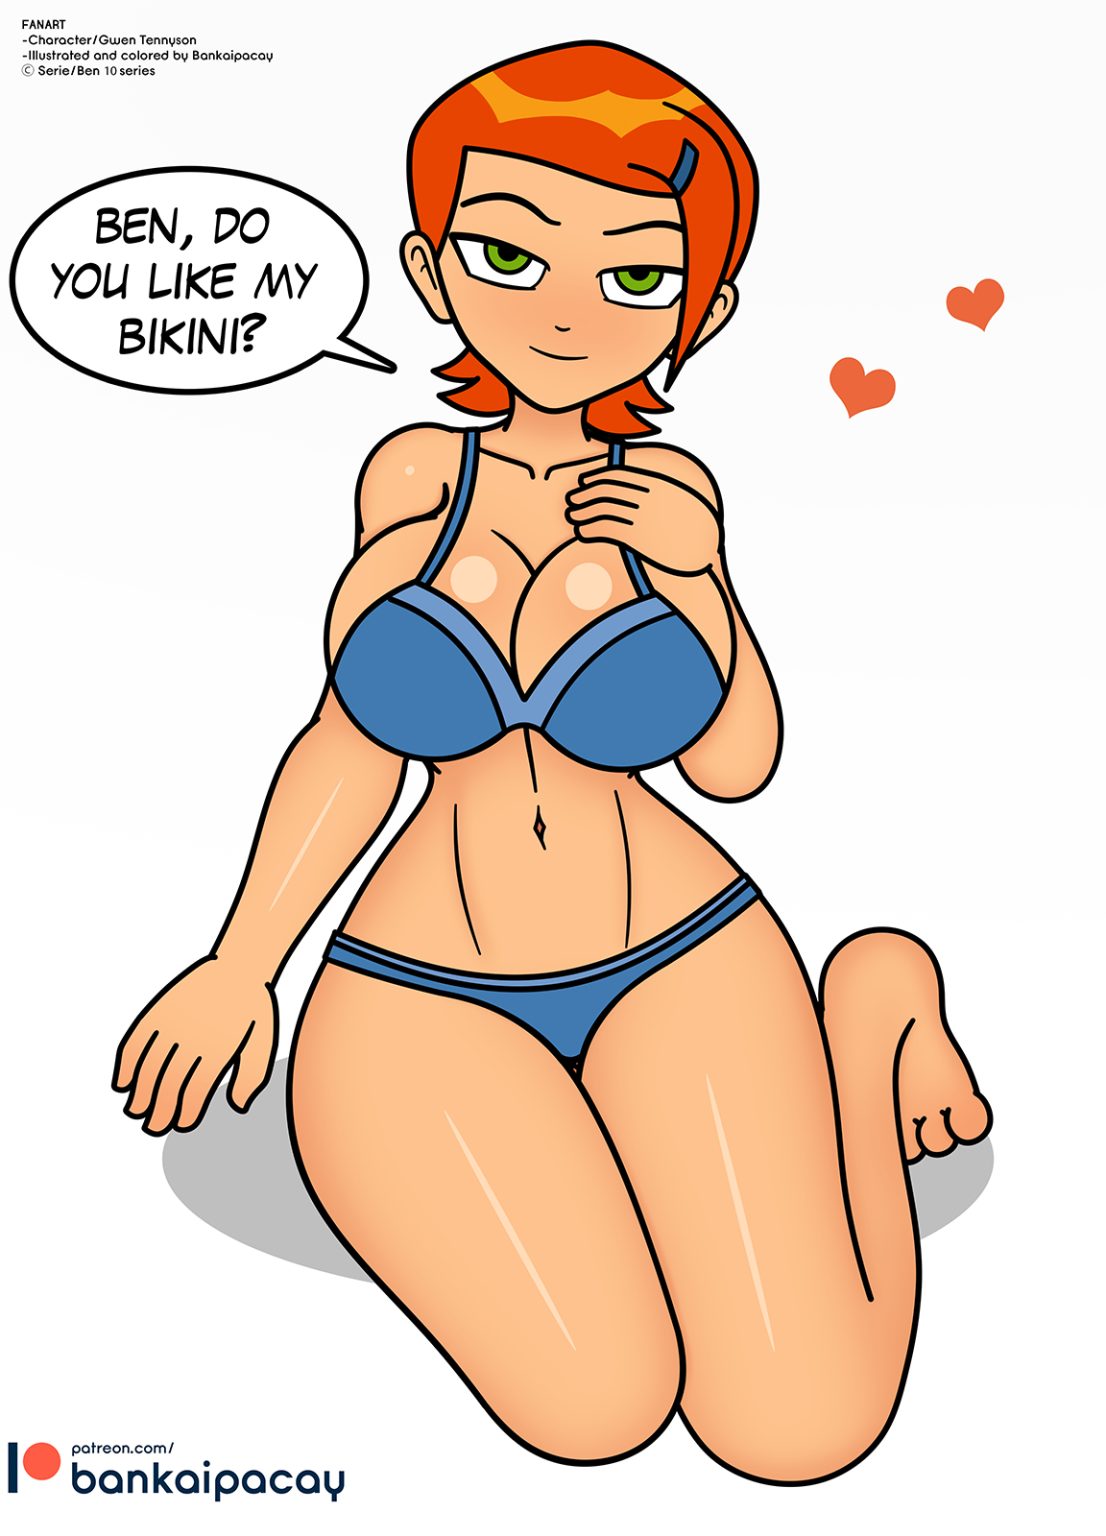 Gwen x ben pool situation porn comic picture 1